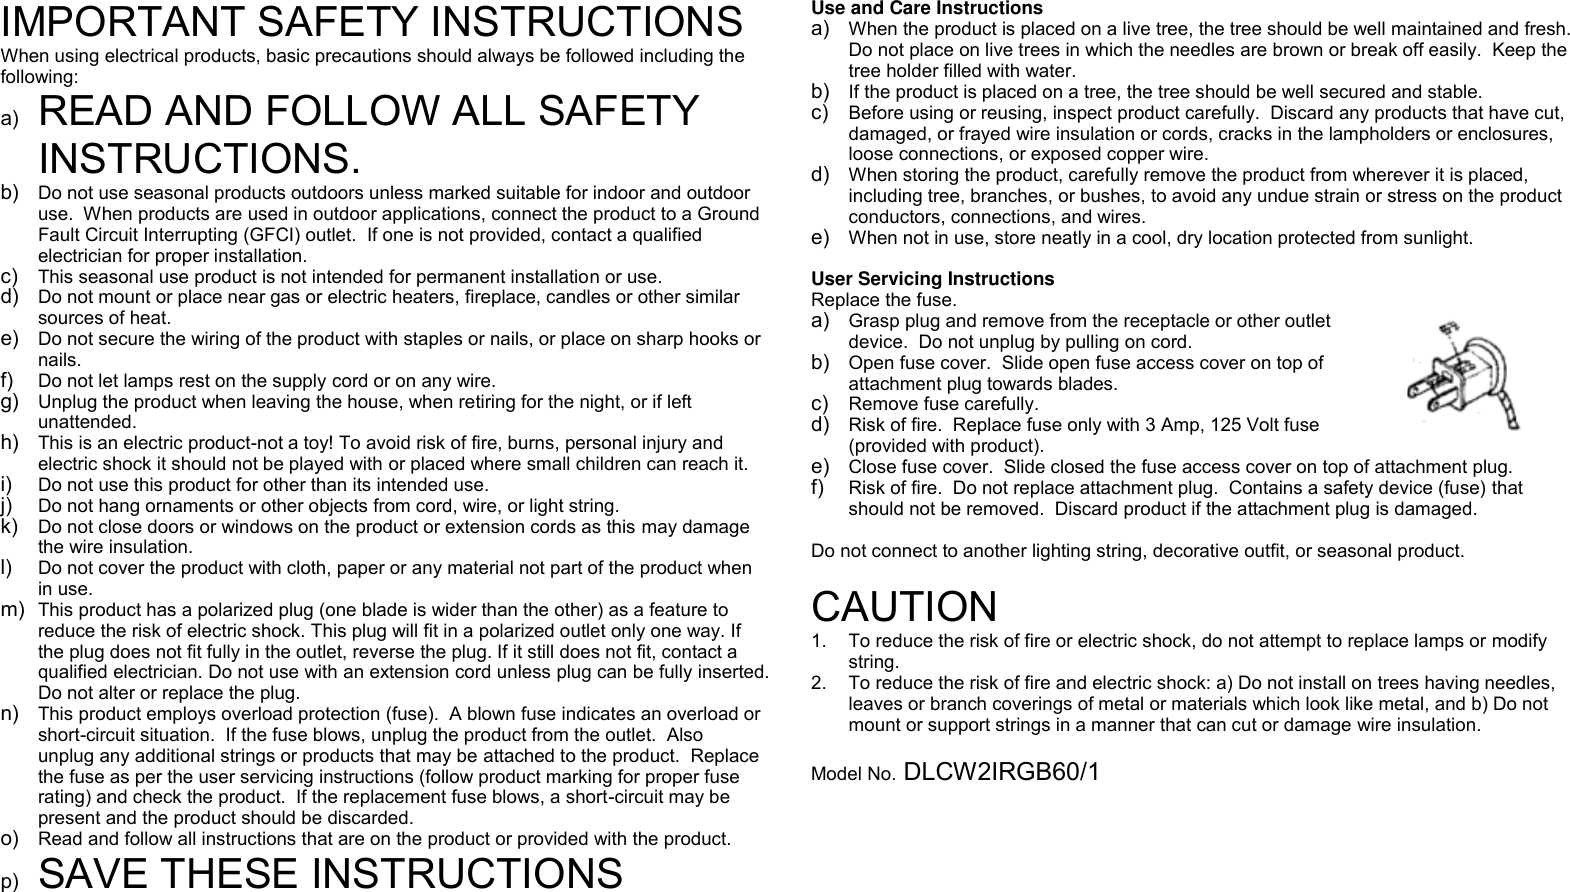  IMPORTANT SAFETY INSTRUCTIONS When using electrical products, basic precautions should always be followed including the following: a) READ AND FOLLOW ALL SAFETY INSTRUCTIONS. b) Do not use seasonal products outdoors unless marked suitable for indoor and outdoor use.  When products are used in outdoor applications, connect the product to a Ground Fault Circuit Interrupting (GFCI) outlet.  If one is not provided, contact a qualified electrician for proper installation. c) This seasonal use product is not intended for permanent installation or use. d) Do not mount or place near gas or electric heaters, fireplace, candles or other similar sources of heat. e) Do not secure the wiring of the product with staples or nails, or place on sharp hooks or nails. f) Do not let lamps rest on the supply cord or on any wire. g) Unplug the product when leaving the house, when retiring for the night, or if left unattended. h) This is an electric product-not a toy! To avoid risk of fire, burns, personal injury and electric shock it should not be played with or placed where small children can reach it. i) Do not use this product for other than its intended use. j) Do not hang ornaments or other objects from cord, wire, or light string. k) Do not close doors or windows on the product or extension cords as this may damage the wire insulation. l) Do not cover the product with cloth, paper or any material not part of the product when in use. m) This product has a polarized plug (one blade is wider than the other) as a feature to reduce the risk of electric shock. This plug will fit in a polarized outlet only one way. If the plug does not fit fully in the outlet, reverse the plug. If it still does not fit, contact a qualified electrician. Do not use with an extension cord unless plug can be fully inserted. Do not alter or replace the plug. n) This product employs overload protection (fuse).  A blown fuse indicates an overload or short-circuit situation.  If the fuse blows, unplug the product from the outlet.  Also unplug any additional strings or products that may be attached to the product.  Replace the fuse as per the user servicing instructions (follow product marking for proper fuse rating) and check the product.  If the replacement fuse blows, a short-circuit may be present and the product should be discarded. o) Read and follow all instructions that are on the product or provided with the product. p) SAVE THESE INSTRUCTIONS Use and Care Instructions a) When the product is placed on a live tree, the tree should be well maintained and fresh.  Do not place on live trees in which the needles are brown or break off easily.  Keep the tree holder filled with water. b) If the product is placed on a tree, the tree should be well secured and stable. c) Before using or reusing, inspect product carefully.  Discard any products that have cut, damaged, or frayed wire insulation or cords, cracks in the lampholders or enclosures, loose connections, or exposed copper wire. d) When storing the product, carefully remove the product from wherever it is placed, including tree, branches, or bushes, to avoid any undue strain or stress on the product conductors, connections, and wires. e) When not in use, store neatly in a cool, dry location protected from sunlight.  User Servicing Instructions Replace the fuse.    a) Grasp plug and remove from the receptacle or other outlet device.  Do not unplug by pulling on cord. b) Open fuse cover.  Slide open fuse access cover on top of attachment plug towards blades. c) Remove fuse carefully. d) Risk of fire.  Replace fuse only with 3 Amp, 125 Volt fuse (provided with product). e) Close fuse cover.  Slide closed the fuse access cover on top of attachment plug. f) Risk of fire.  Do not replace attachment plug.  Contains a safety device (fuse) that should not be removed.  Discard product if the attachment plug is damaged.  Do not connect to another lighting string, decorative outfit, or seasonal product.  CAUTION 1.  To reduce the risk of fire or electric shock, do not attempt to replace lamps or modify string.   2.  To reduce the risk of fire and electric shock: a) Do not install on trees having needles, leaves or branch coverings of metal or materials which look like metal, and b) Do not mount or support strings in a manner that can cut or damage wire insulation.  Model No. DLCW2IRGB60/1   